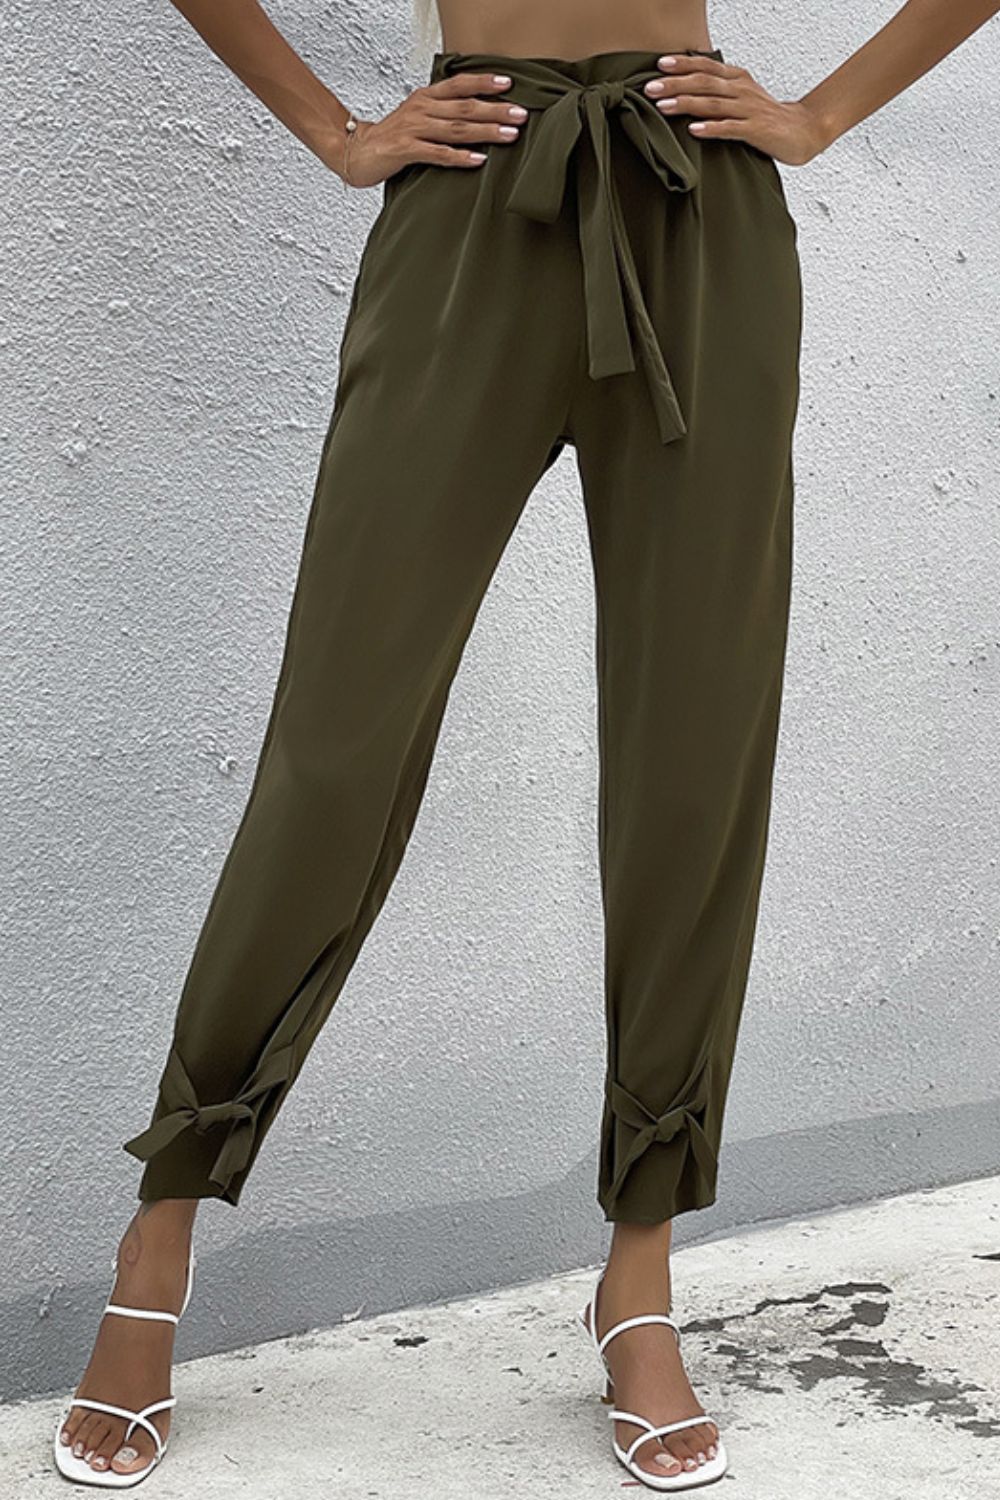 Tie Detail Belted Pants with Pockets Trendsi